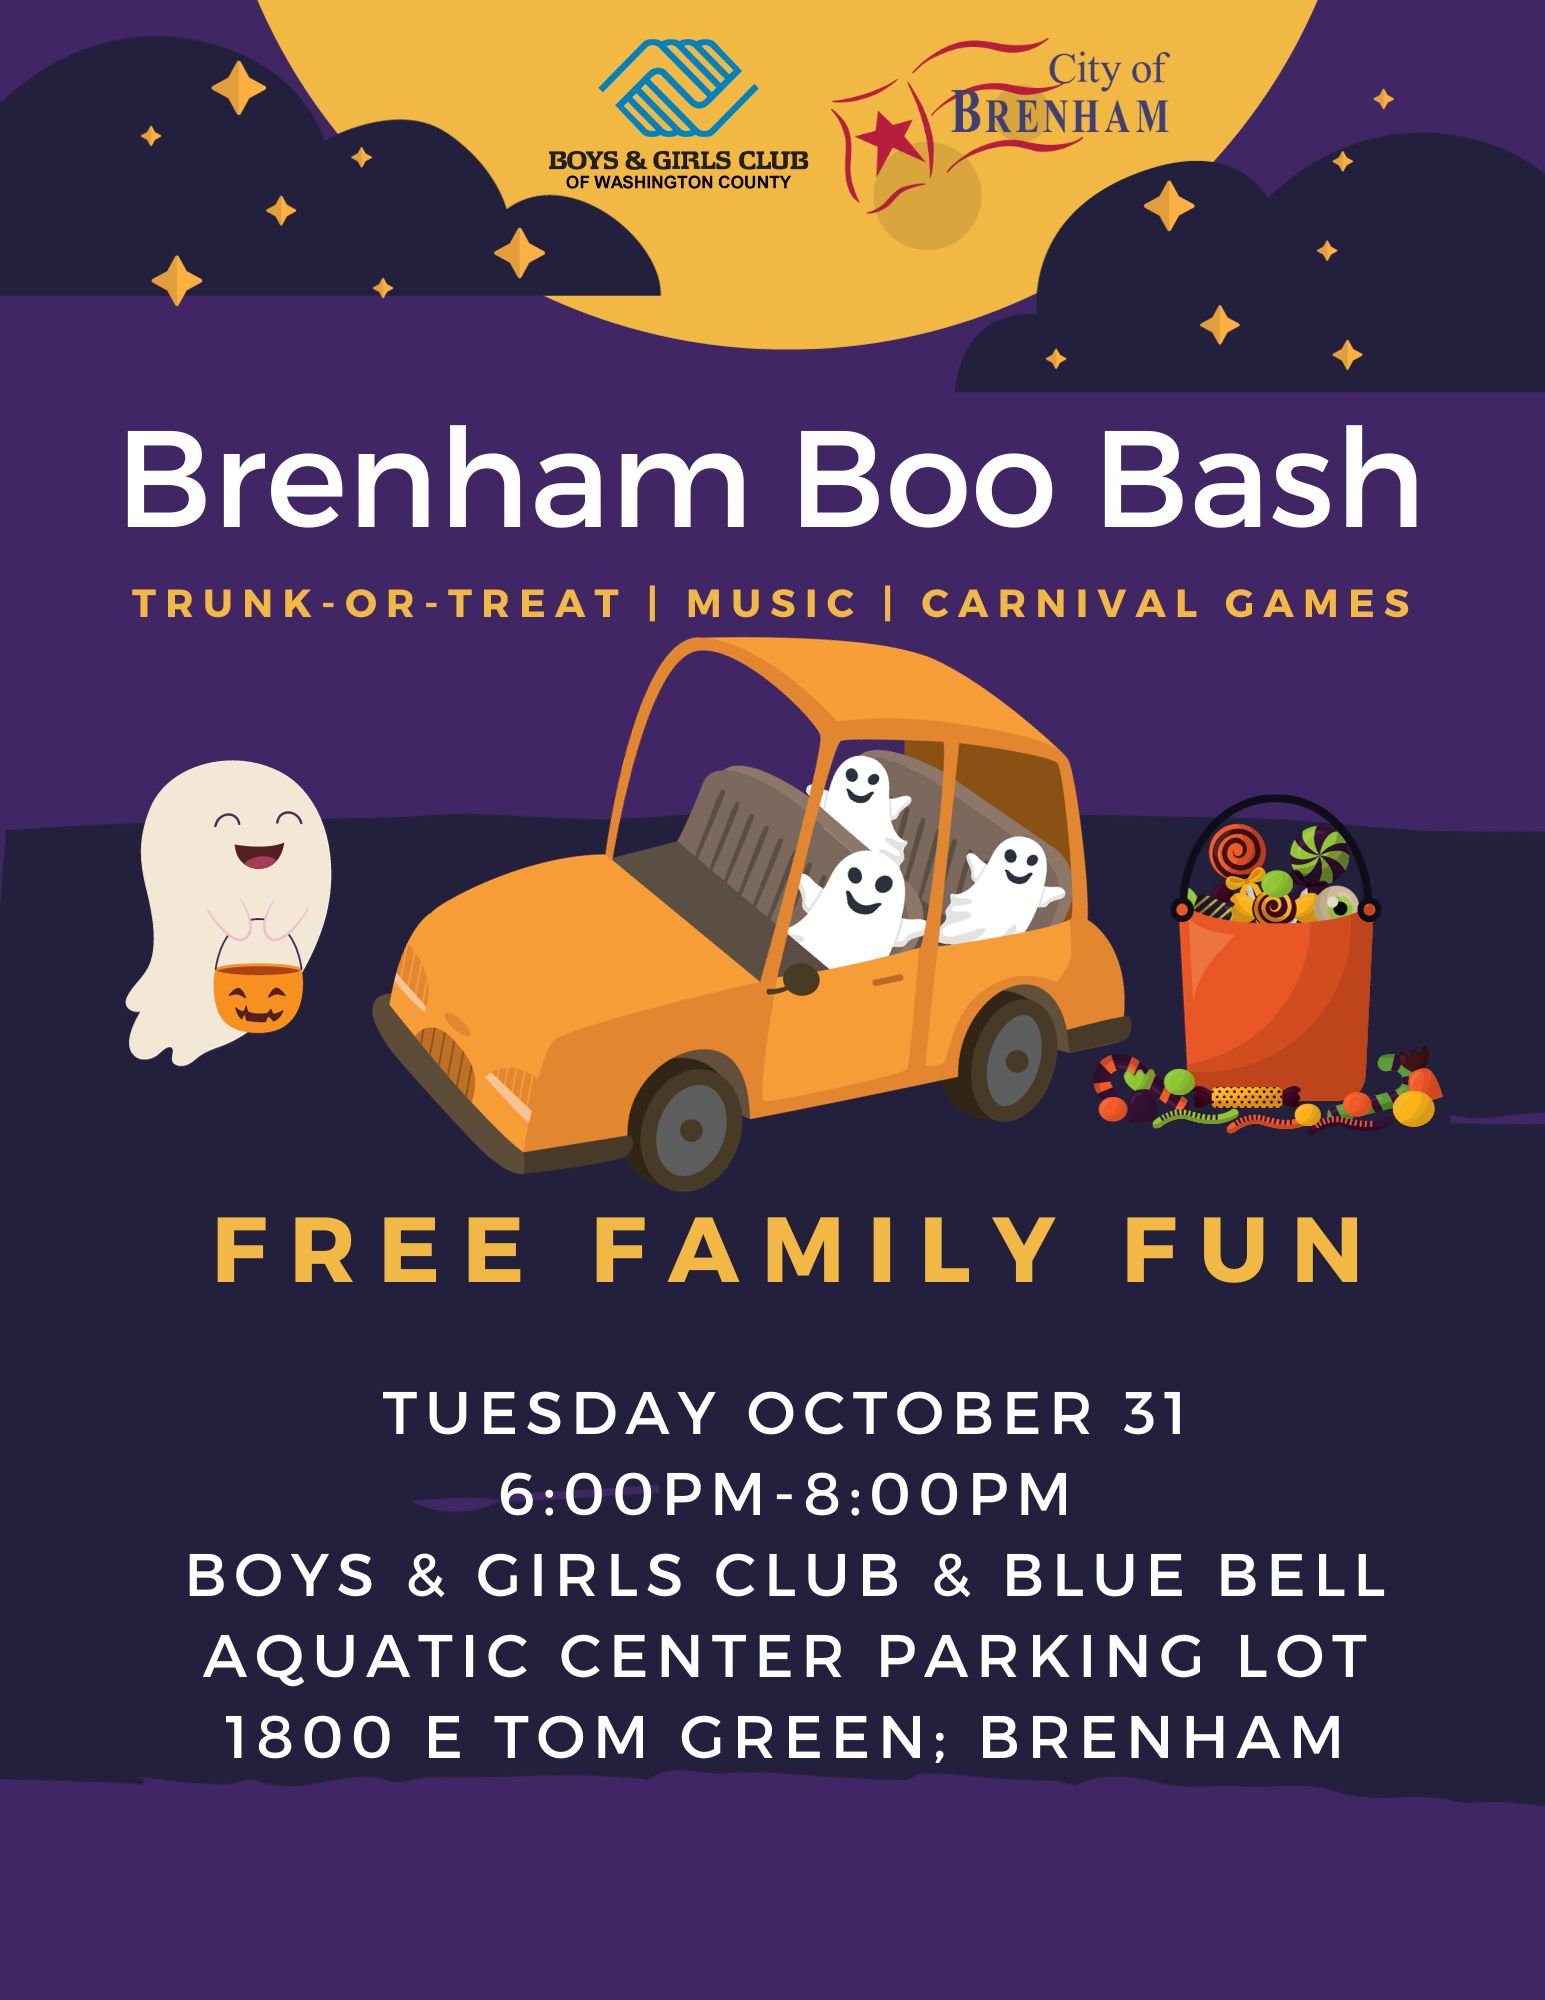 Brenham Boo Bash poster of a car with a family of ghosts and candy - Trunk or treat | music | carnival games - free family fun - Tuesday October 31, 6 pm - 8 pm at the boys and girls club and blue bell aquatic center parking lot at 1800 E. tom green, Brenham Tx.